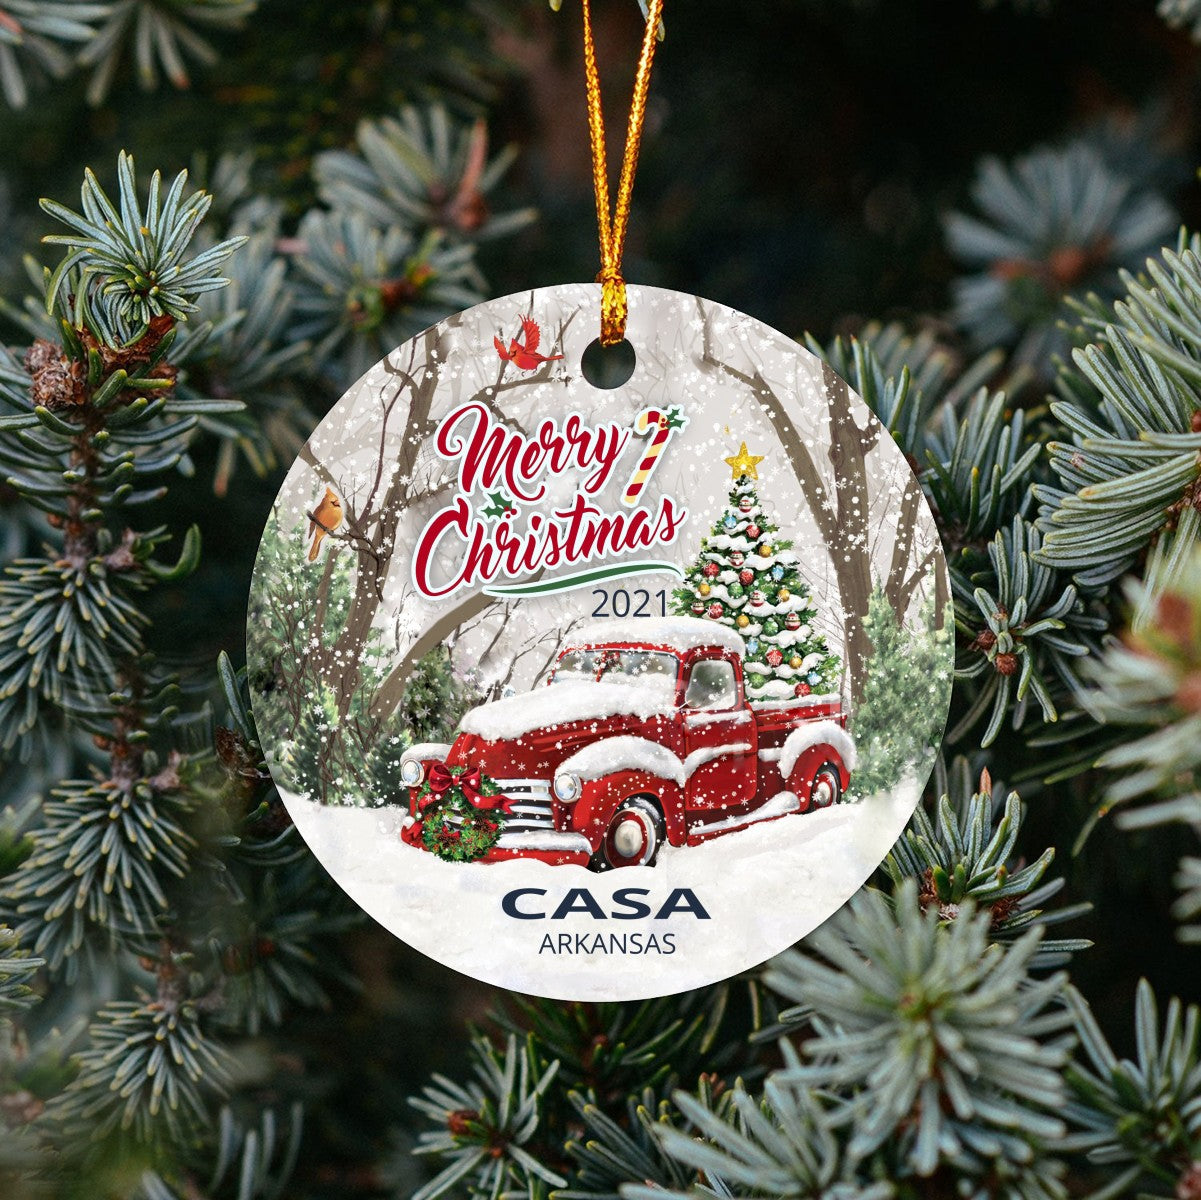 Christmas Tree Ornaments Casa - Ornament With Name City, State Casa Arkansas AR Ornament - Red Truck Xmas Ornaments 3'' Plastic Gift For Family, Friend And Housewarming